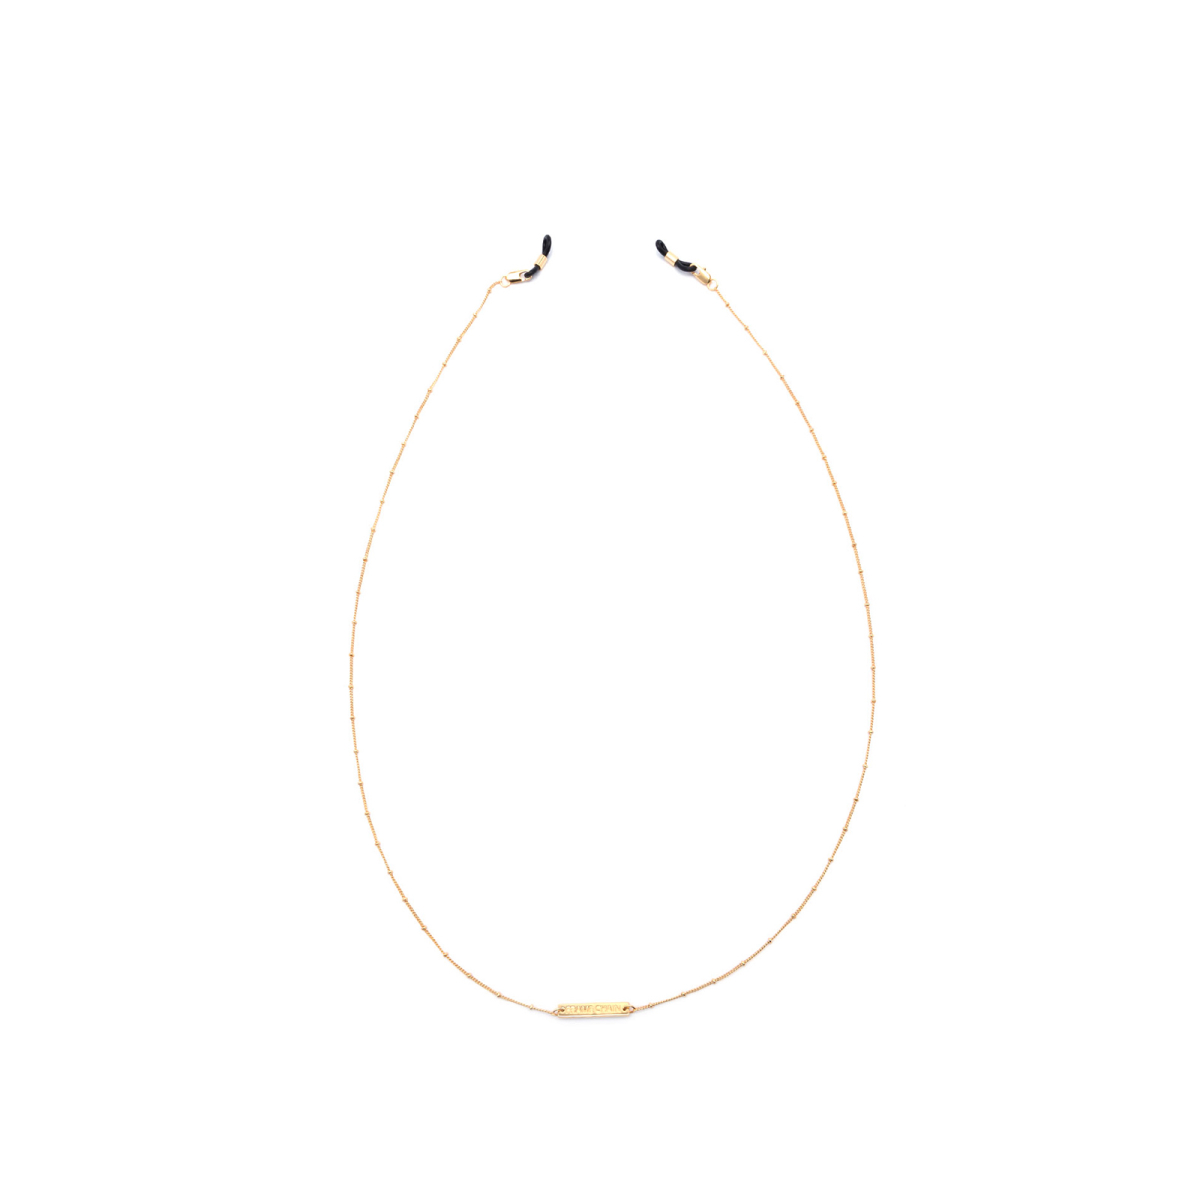 Frame Chain DOTTY YELLOW GOLD  YELLOW GOLD - 2/6